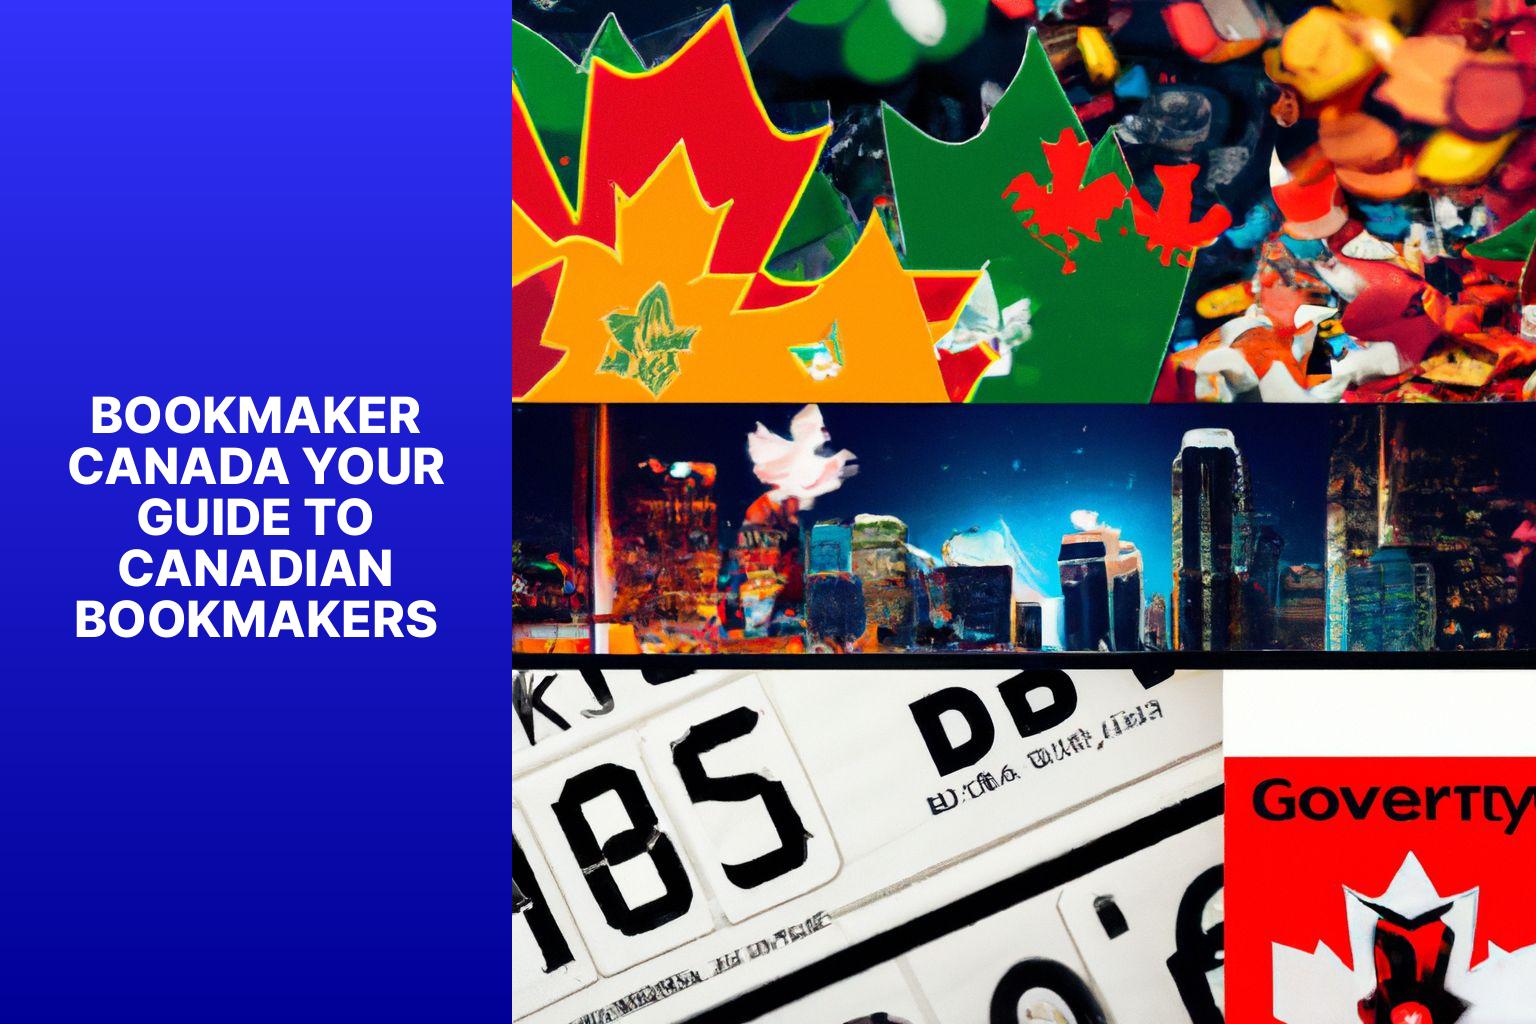 Bookmaker Canada Your Guide to Canadian Bookmakers